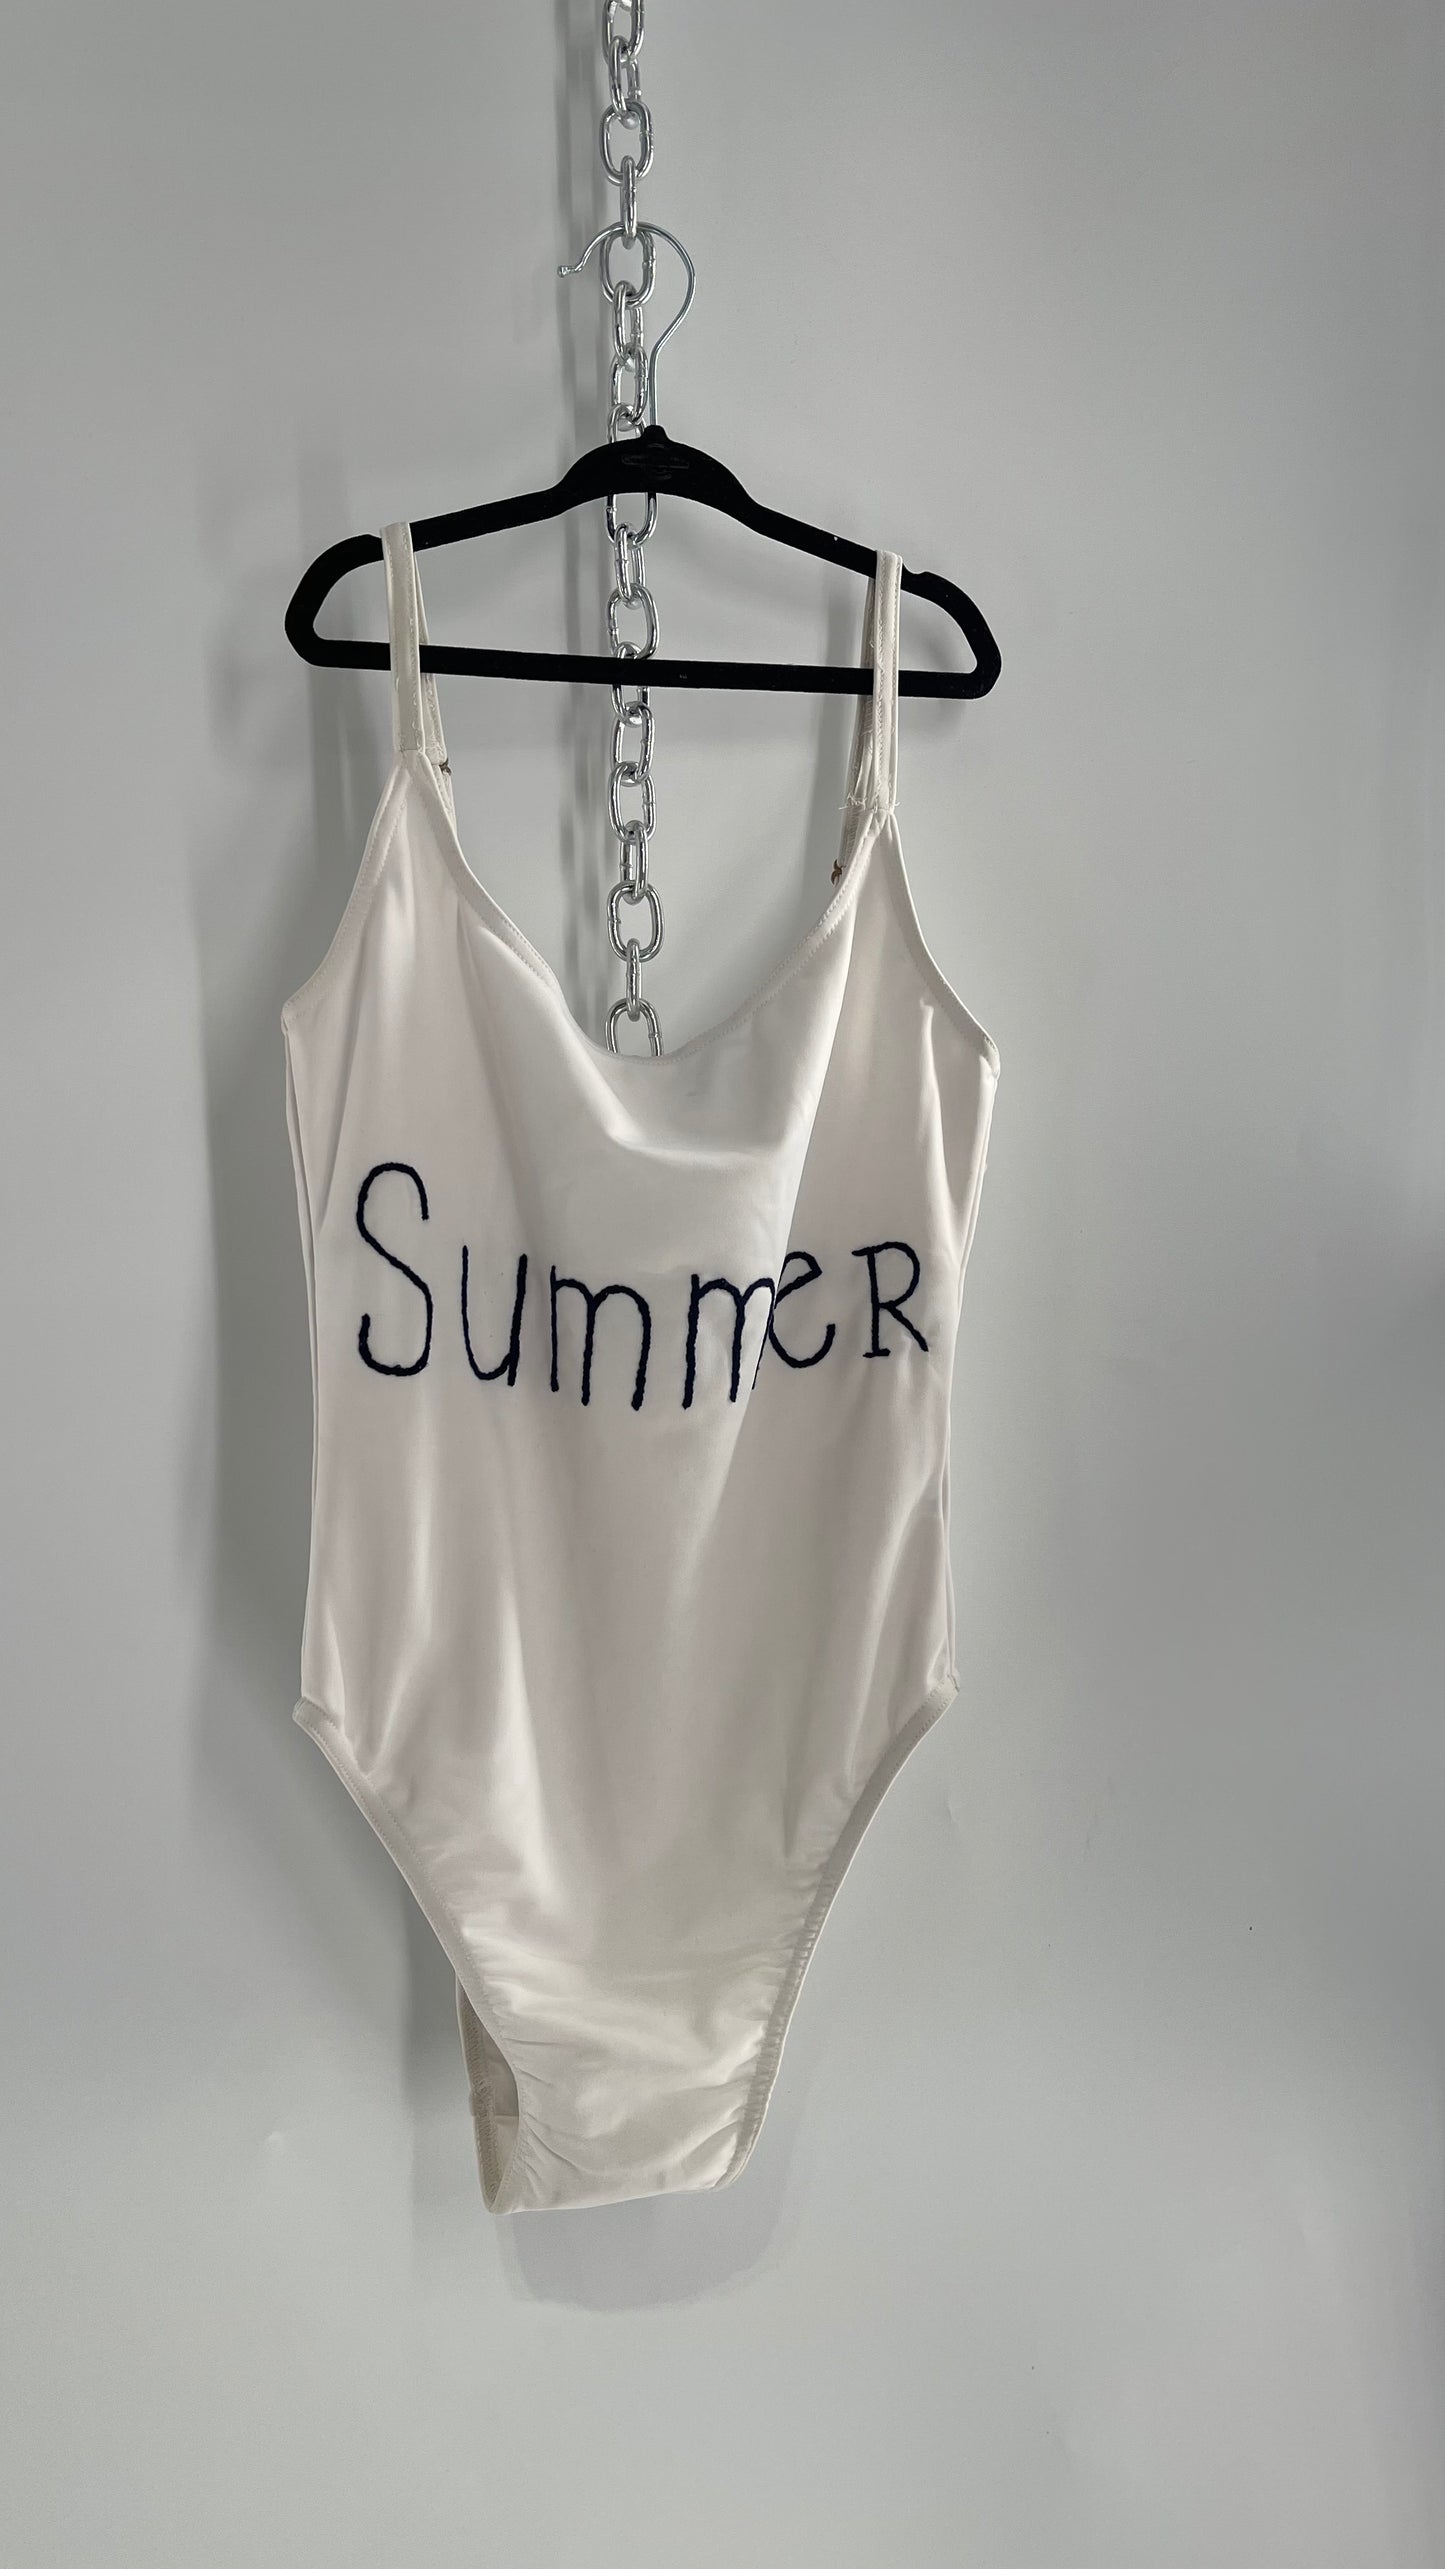 Bannerday White Bathing Suit with Black “Summer” Embroidery (Small)